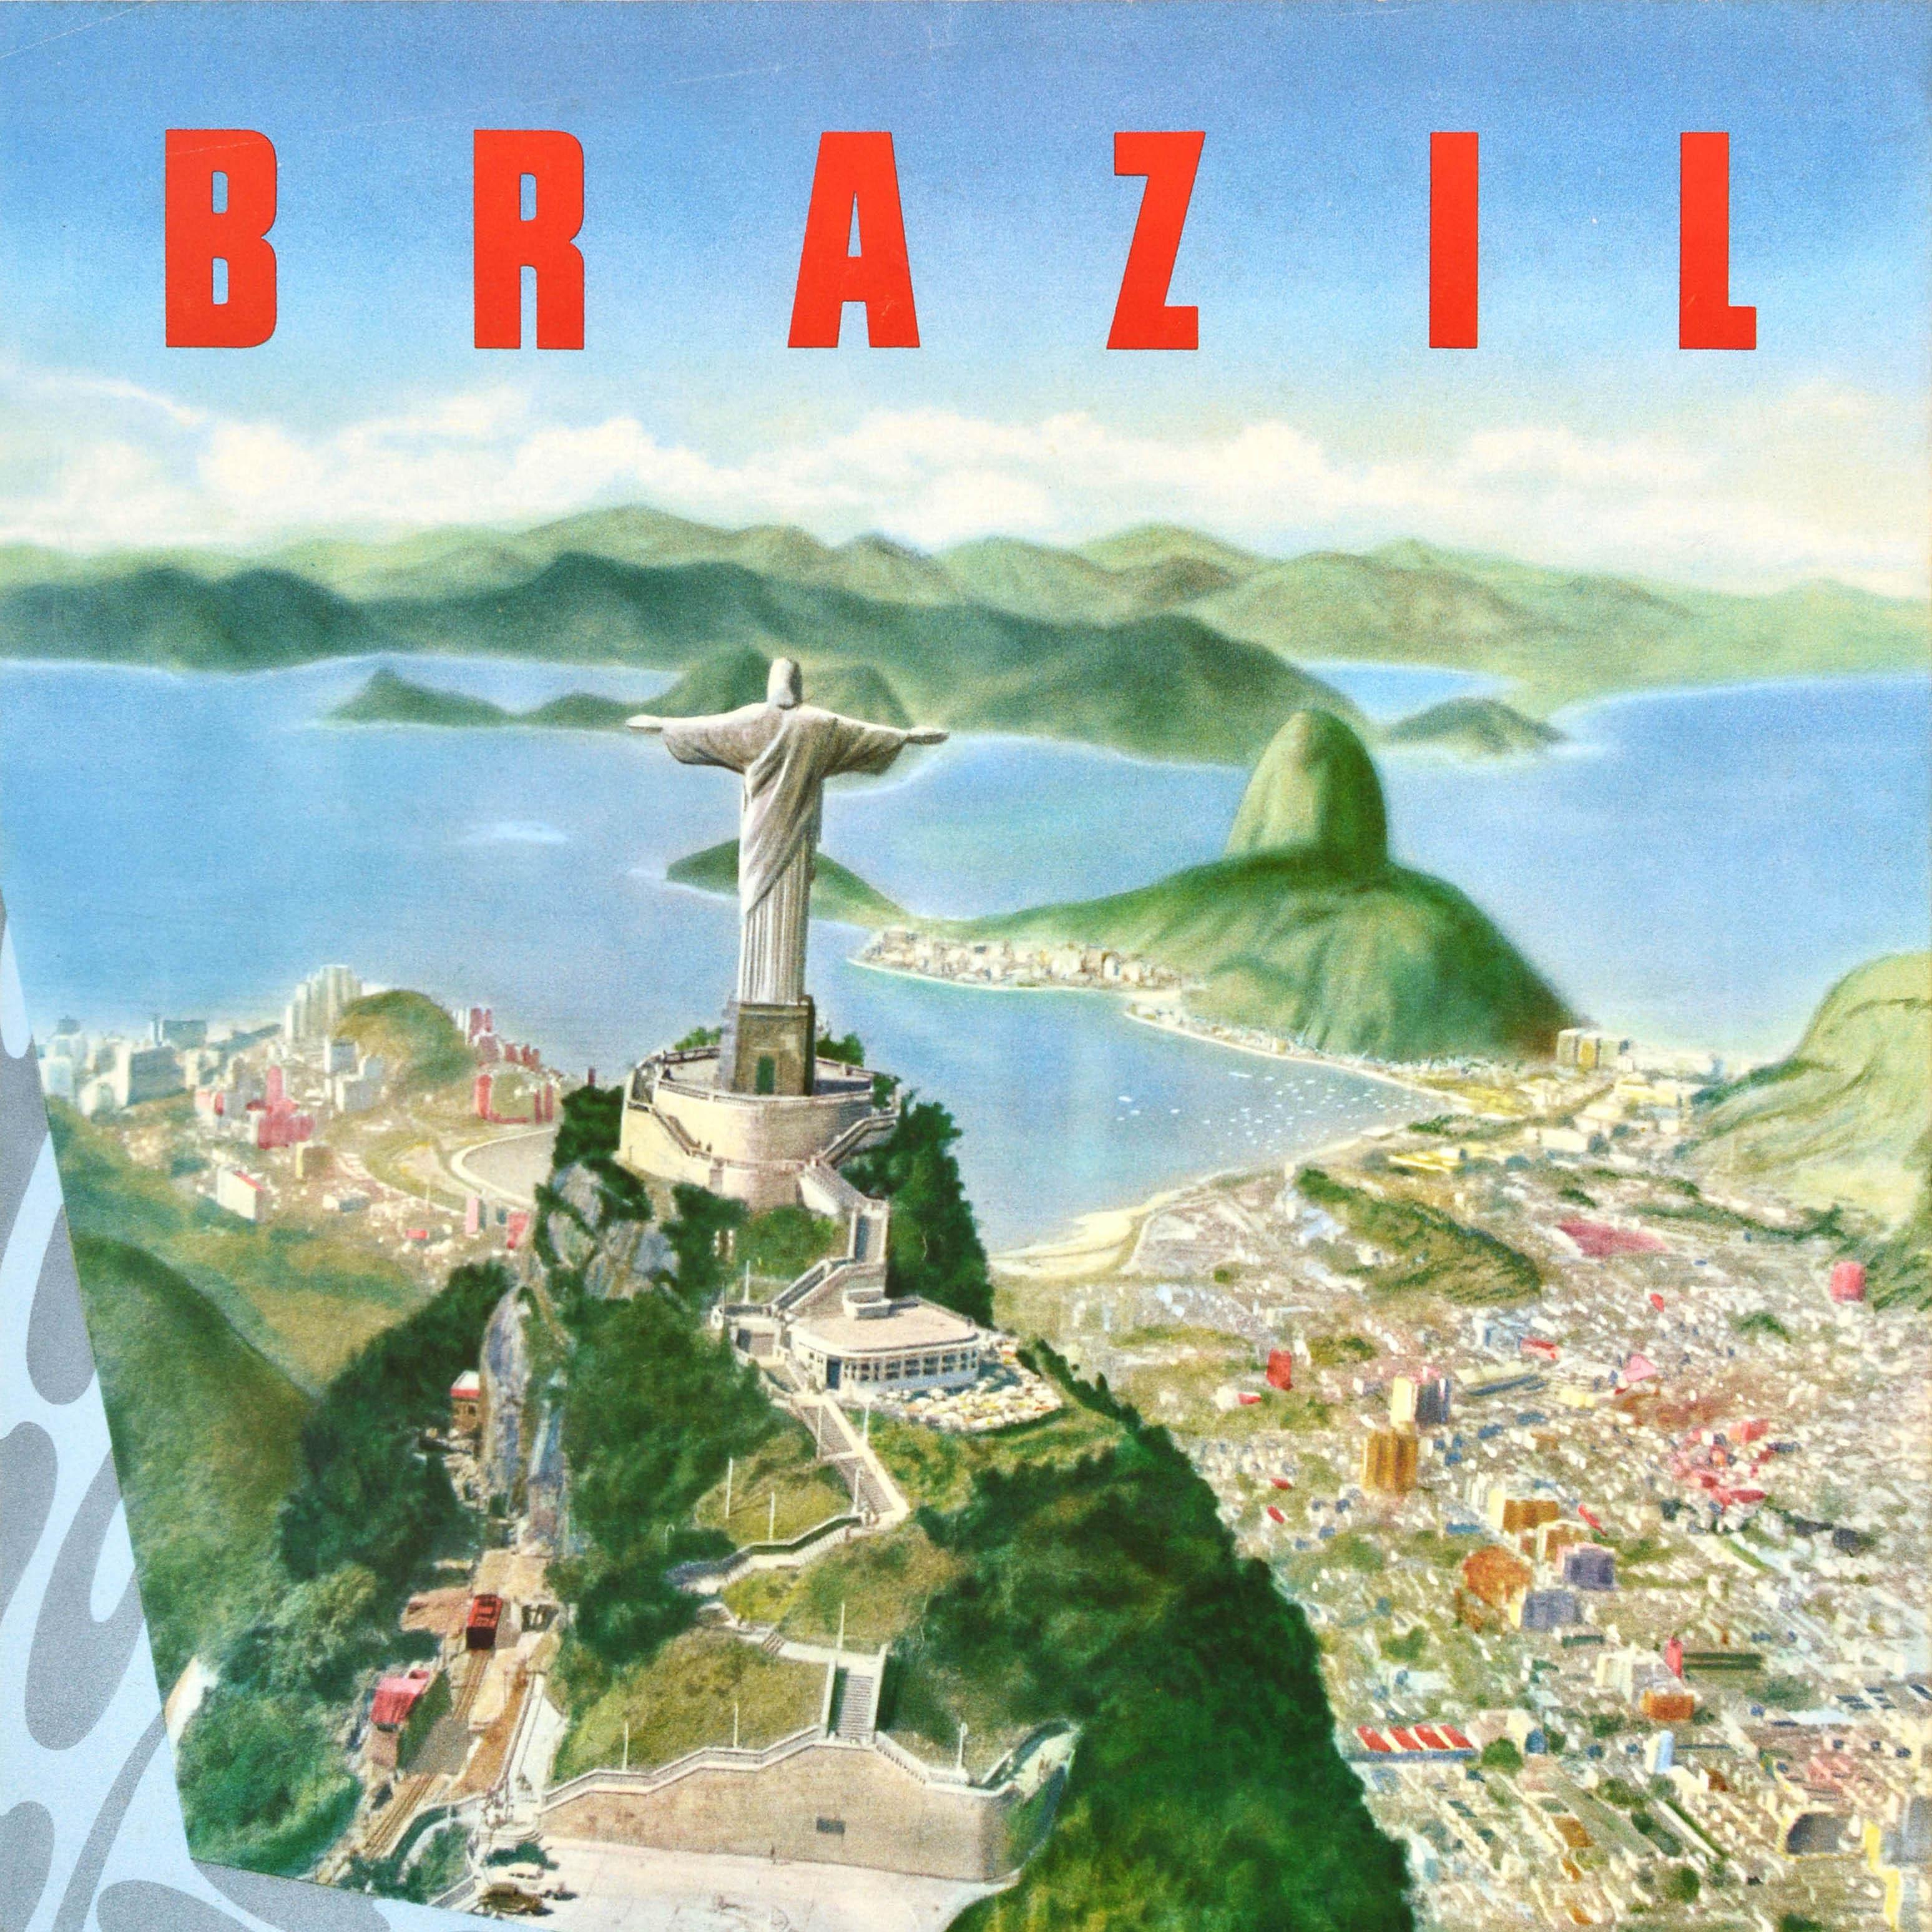 Original vintage travel poster for Rio de Janeiro in Brazil South America featuring the Christ the Redeemer statue on top of Mount Corcovado overlooking the city below with Sugarloaf Mountain and the sea leading to mist covered hills on the horizon,